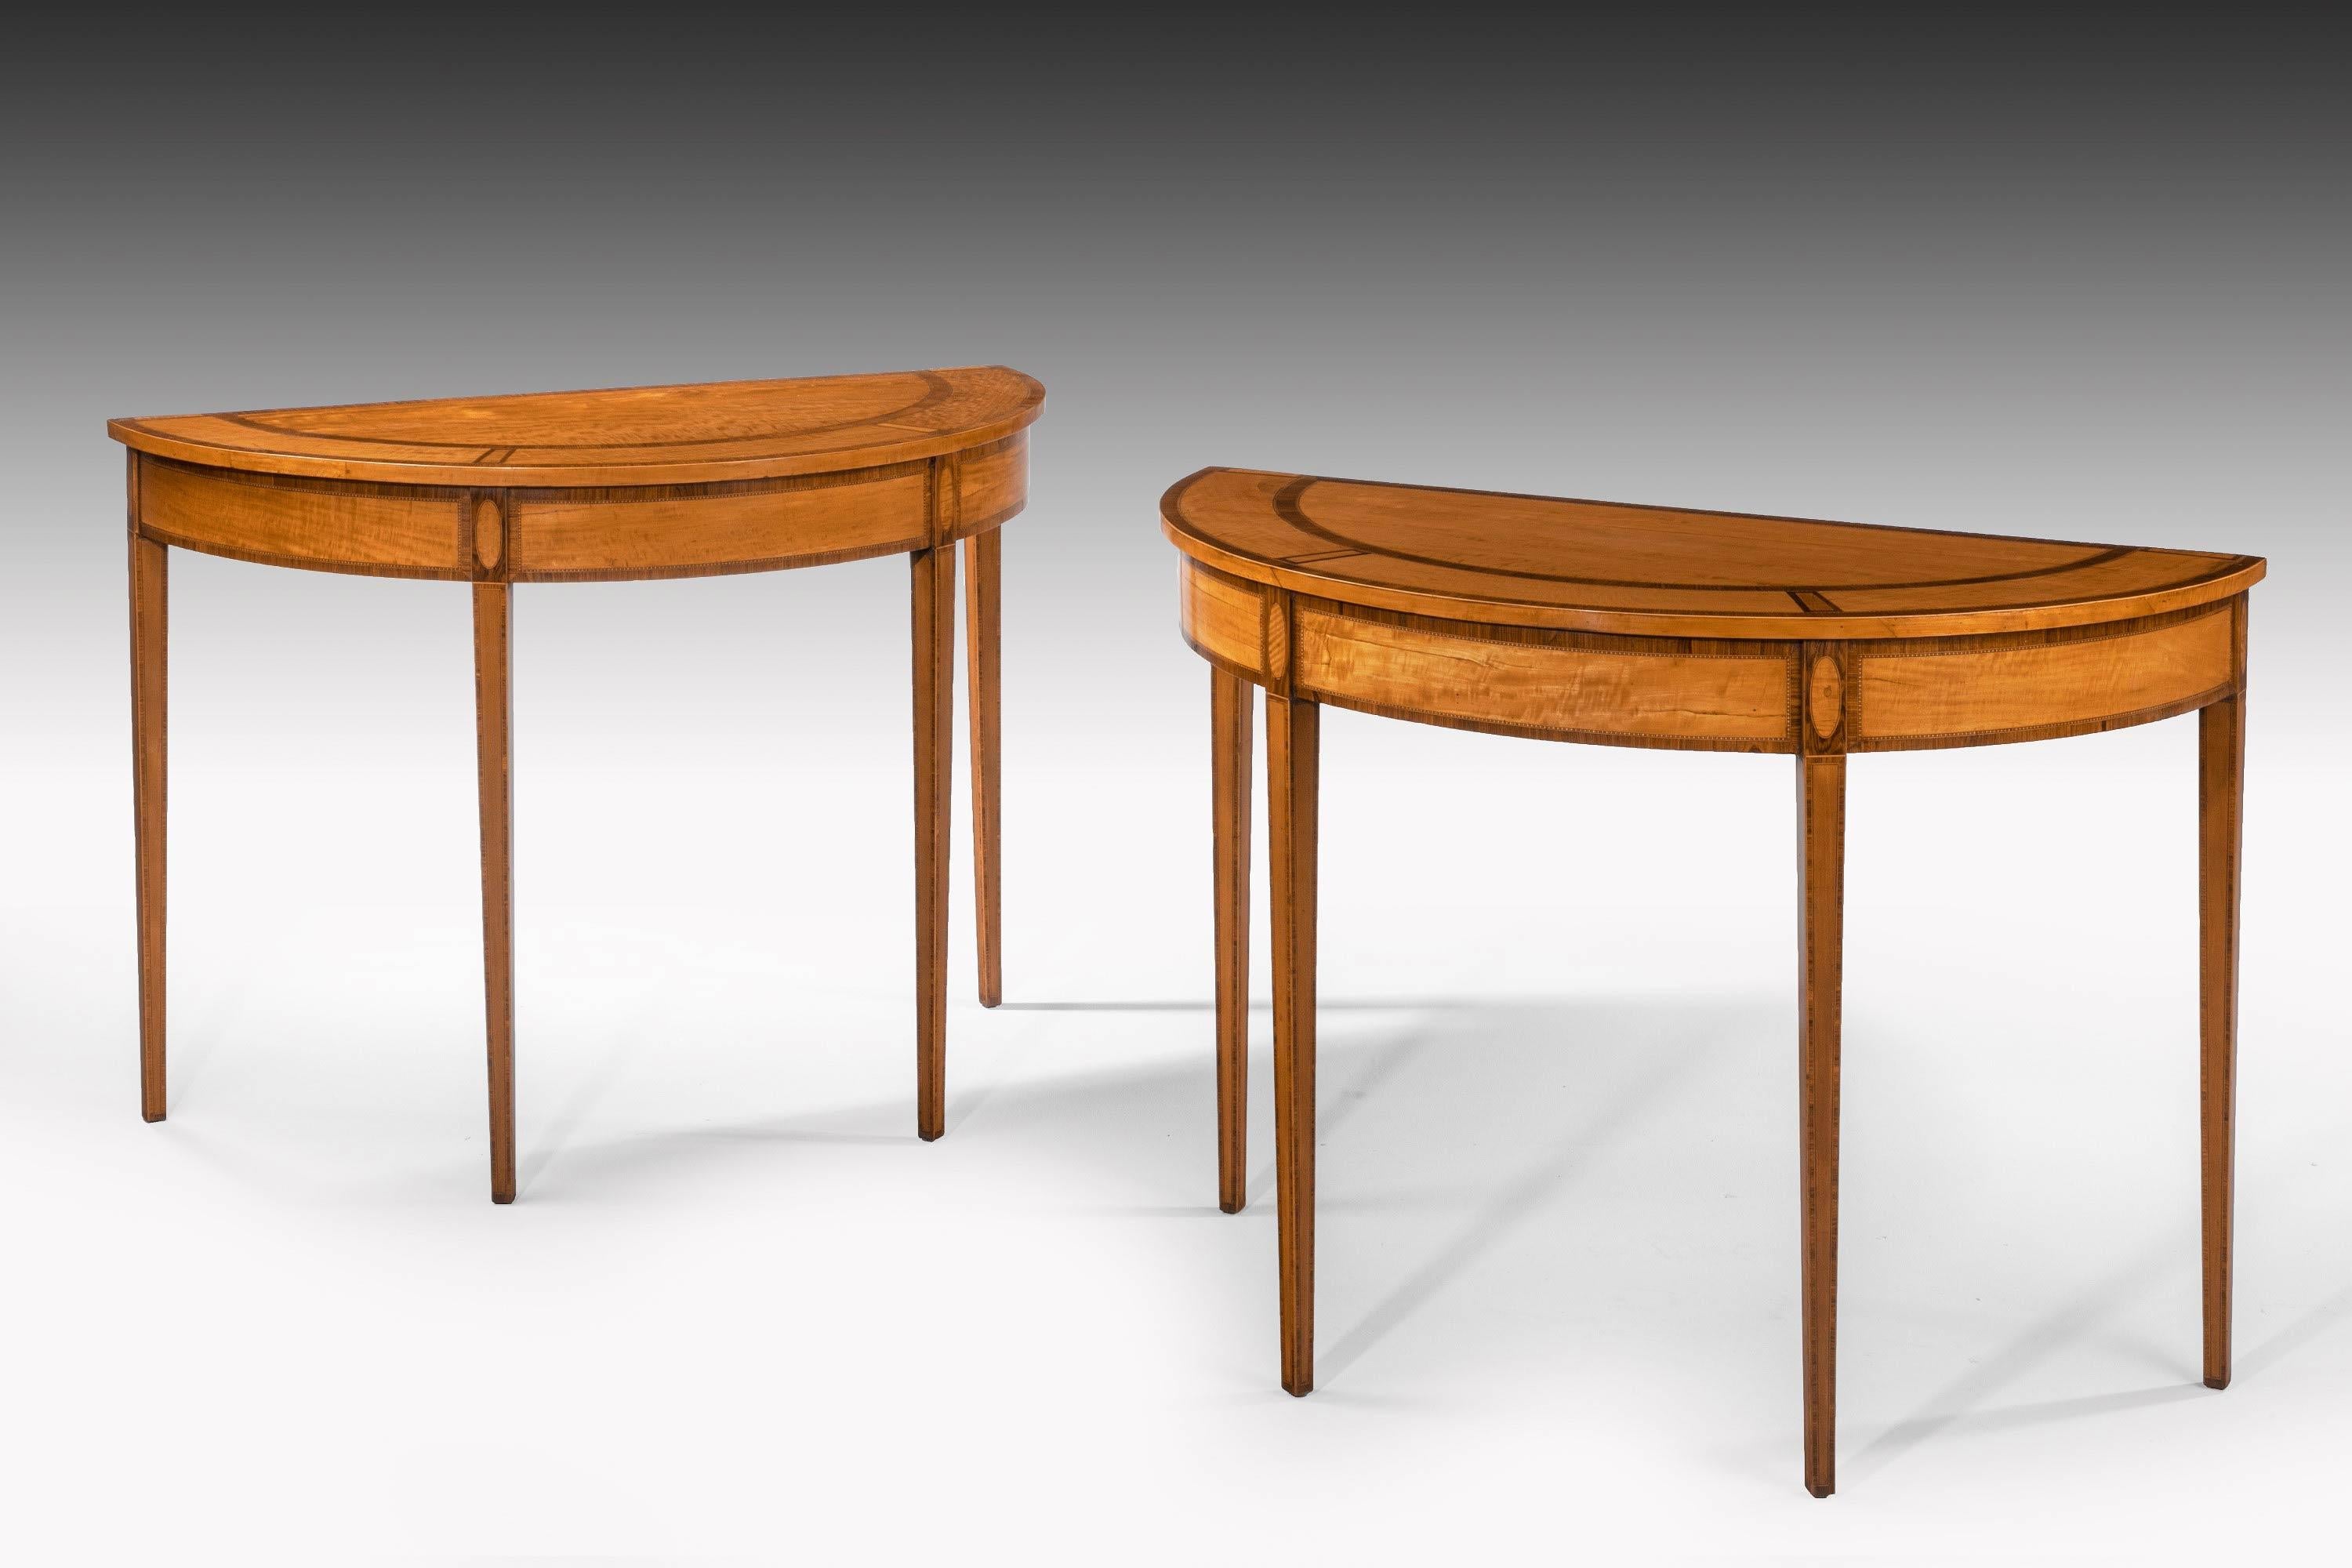 18th Century Fine Pair of George III Period Satinwood and Kingwood Demilune Pier Tables